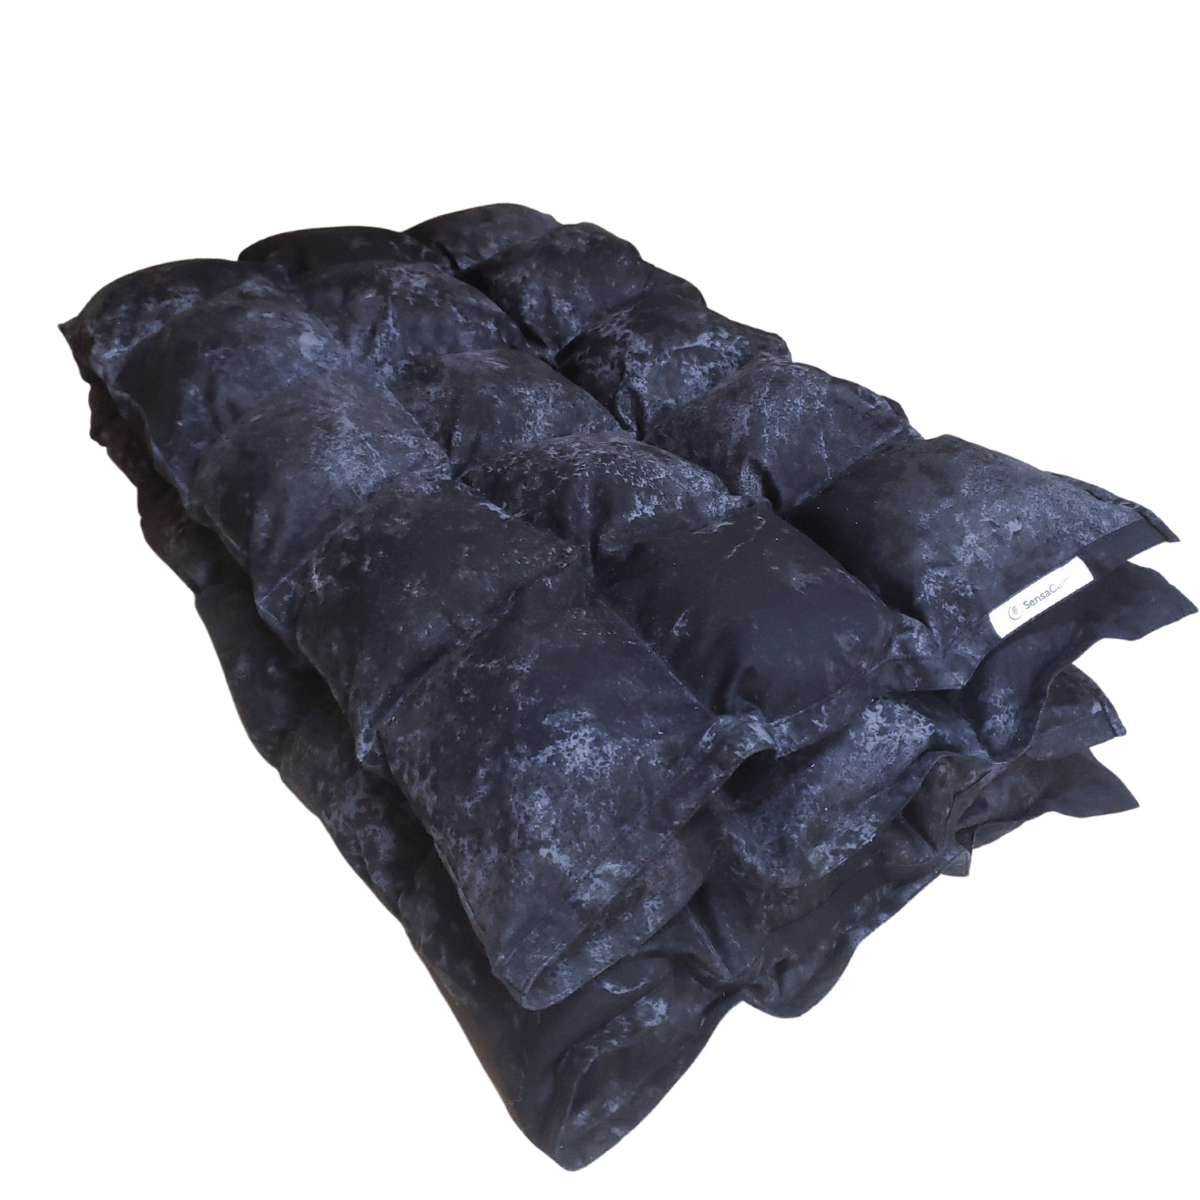 SensaCalm Weighted Blanket - Small (34" x 50") For Toddlers Classic Weighted Blanket Stone Black